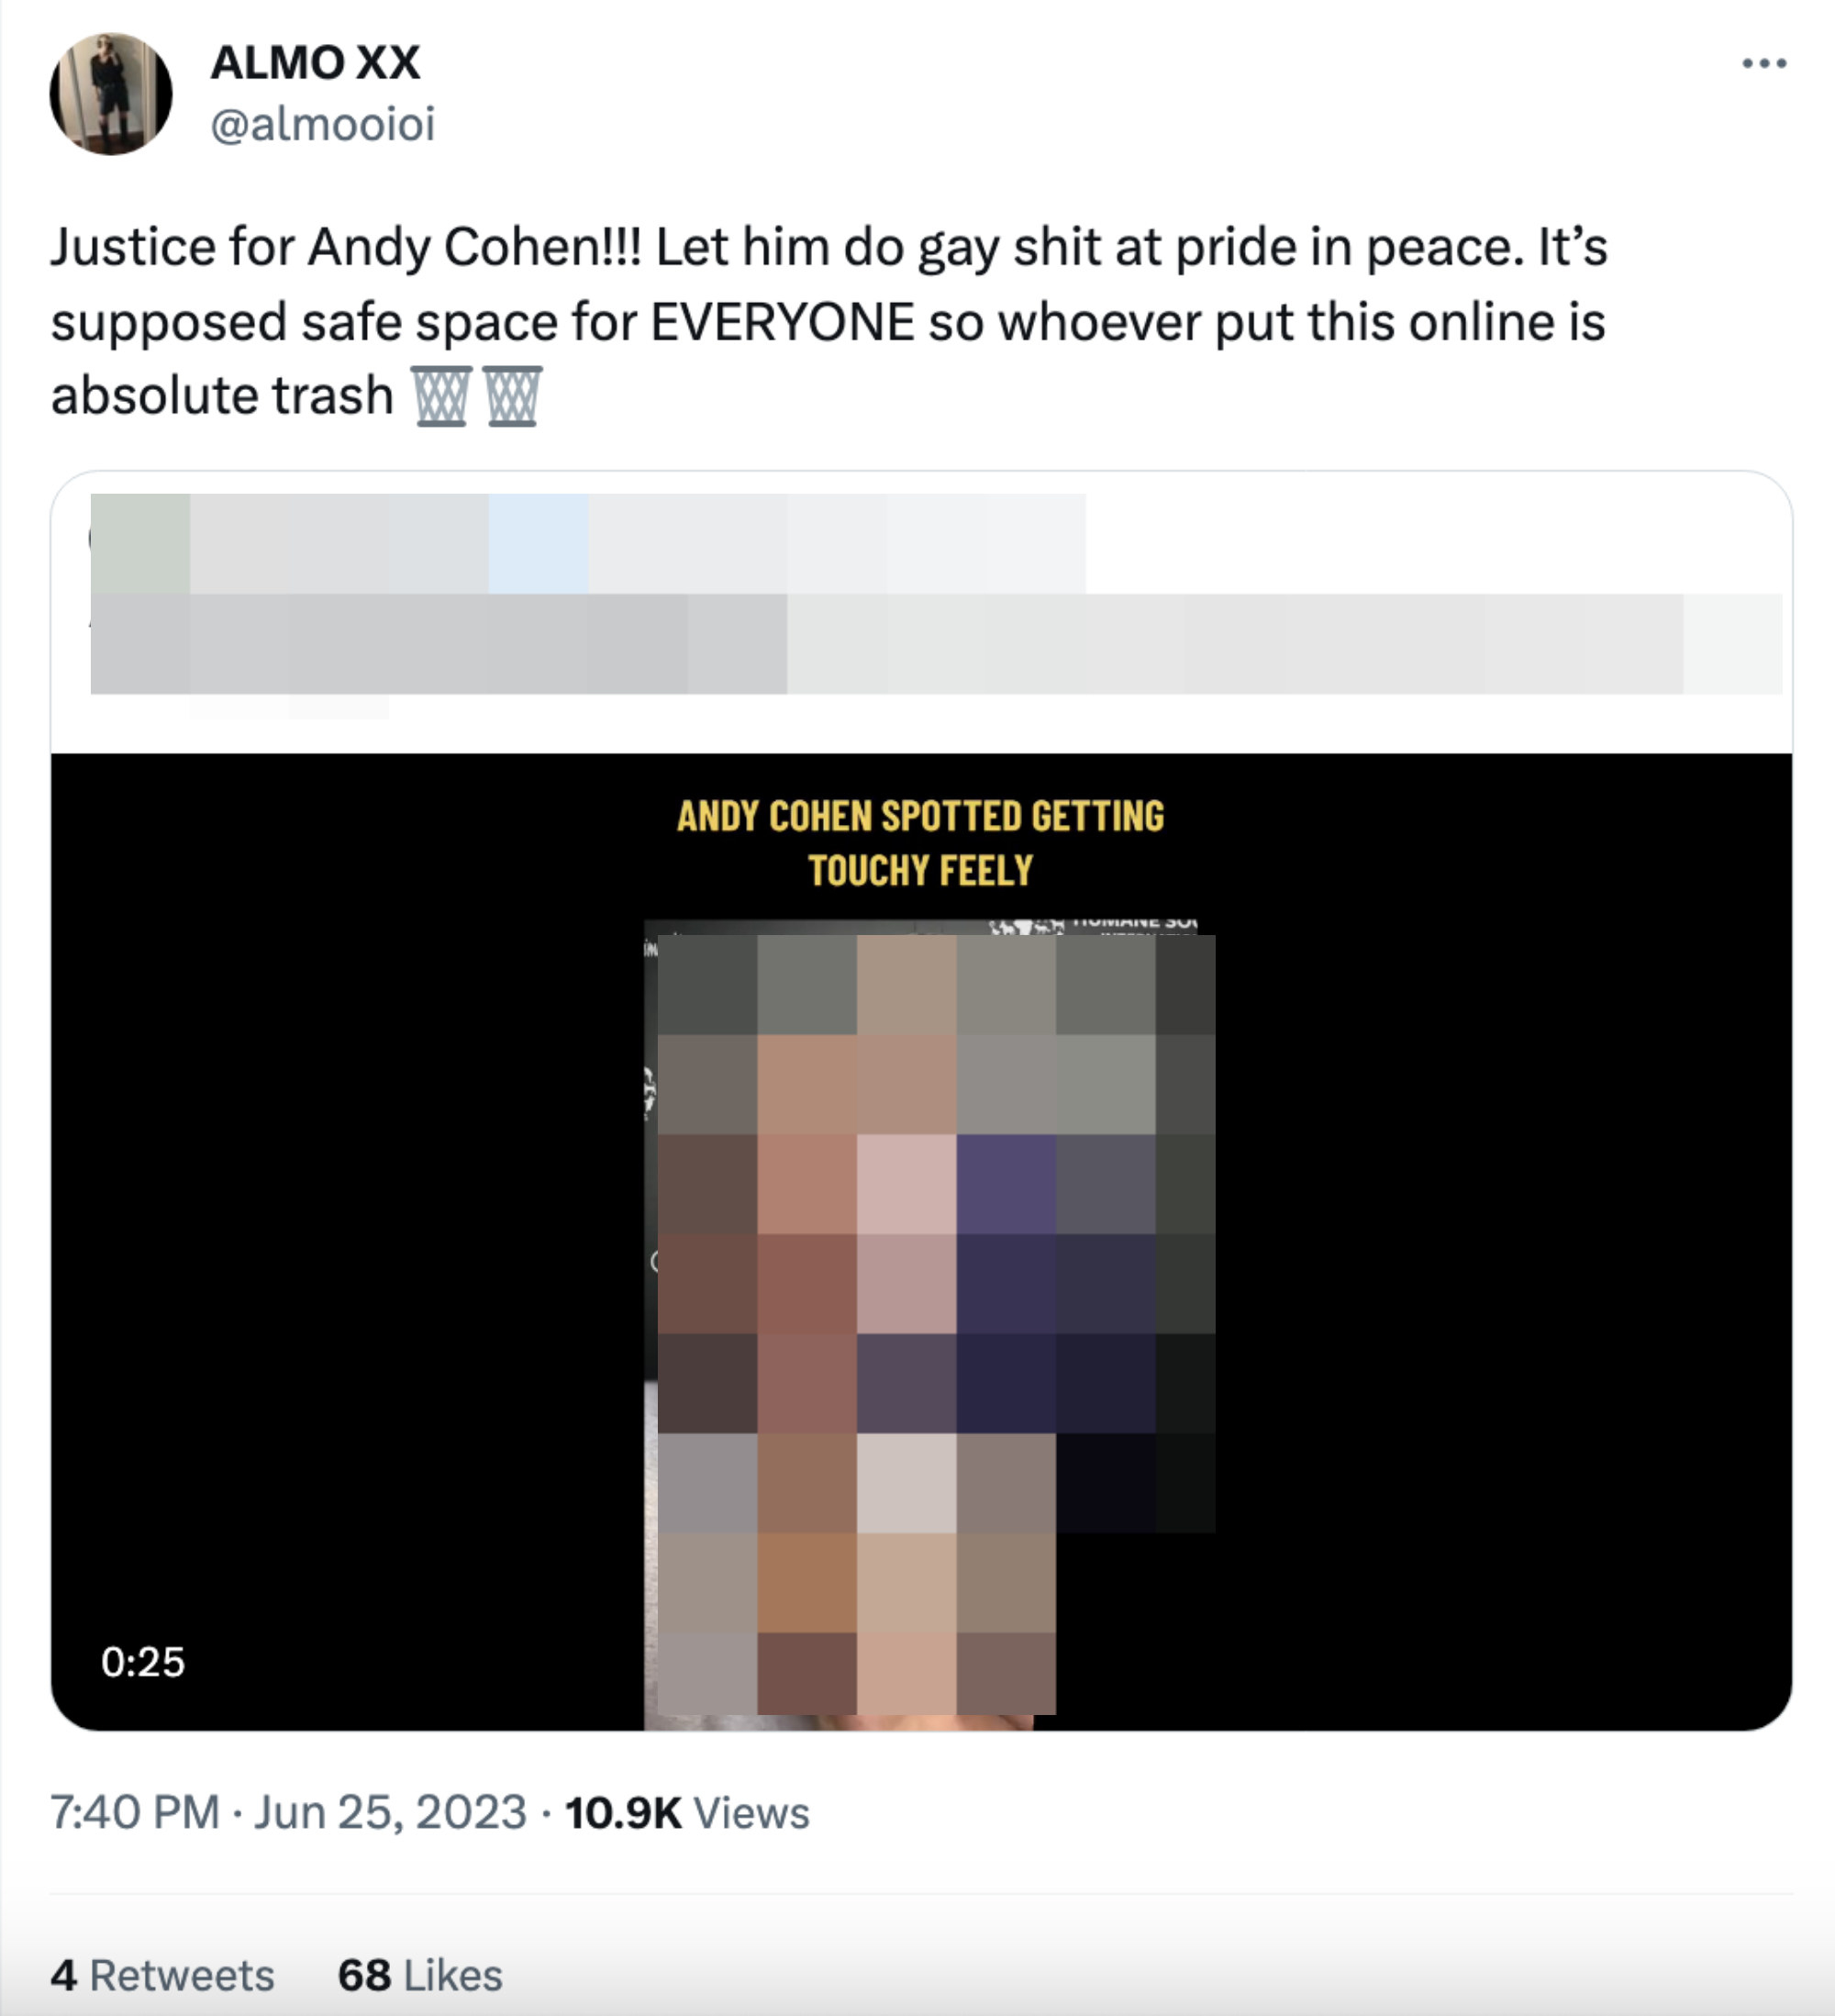 Justice for Andy Cohen!!!! Let him do gay shit at pride in peace. It&#x27;s supposed to be a safe space for EVERYONE so whoever put this online absolute trash